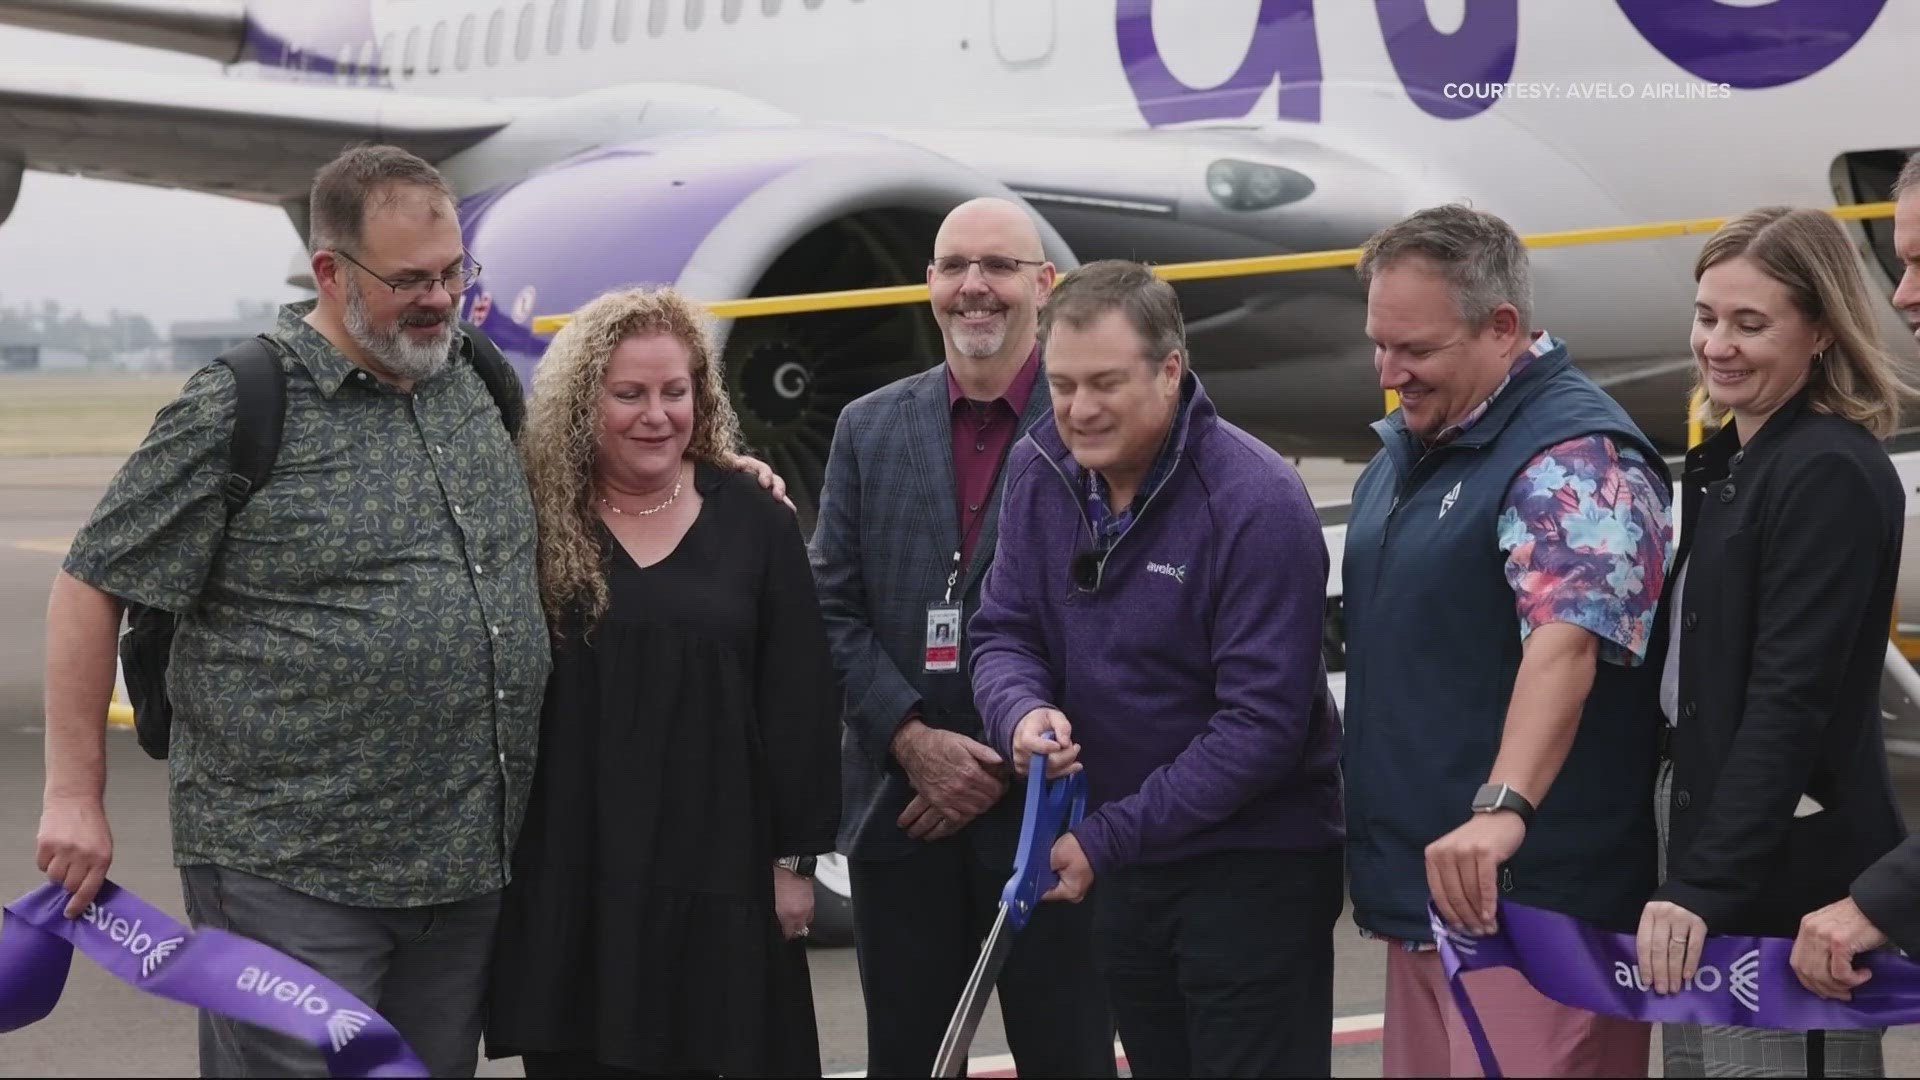 Avelo, a Houston-based, low-cost airline, will add from Salem Municipal Airport to Sonoma County Airport starting May 3.